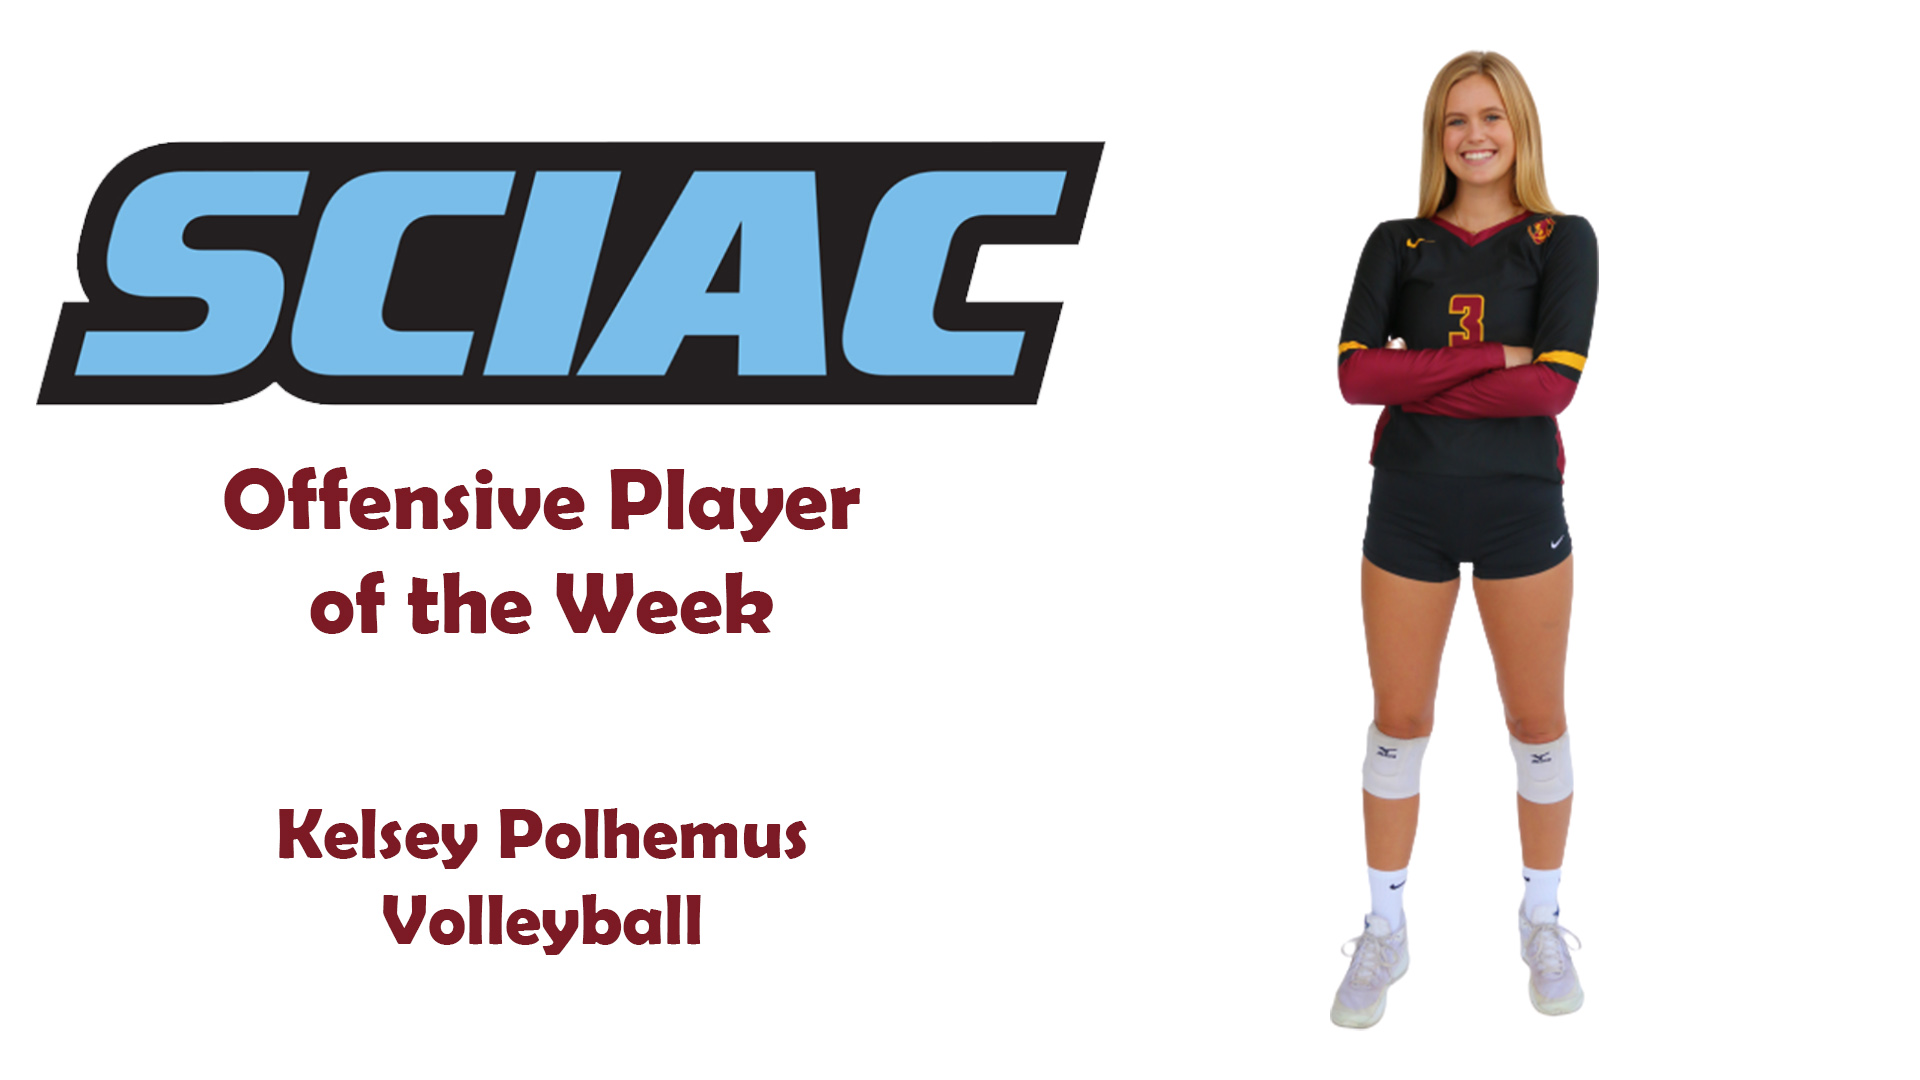 Posed shot of Kelsey Polhemus with the SCIAC logo